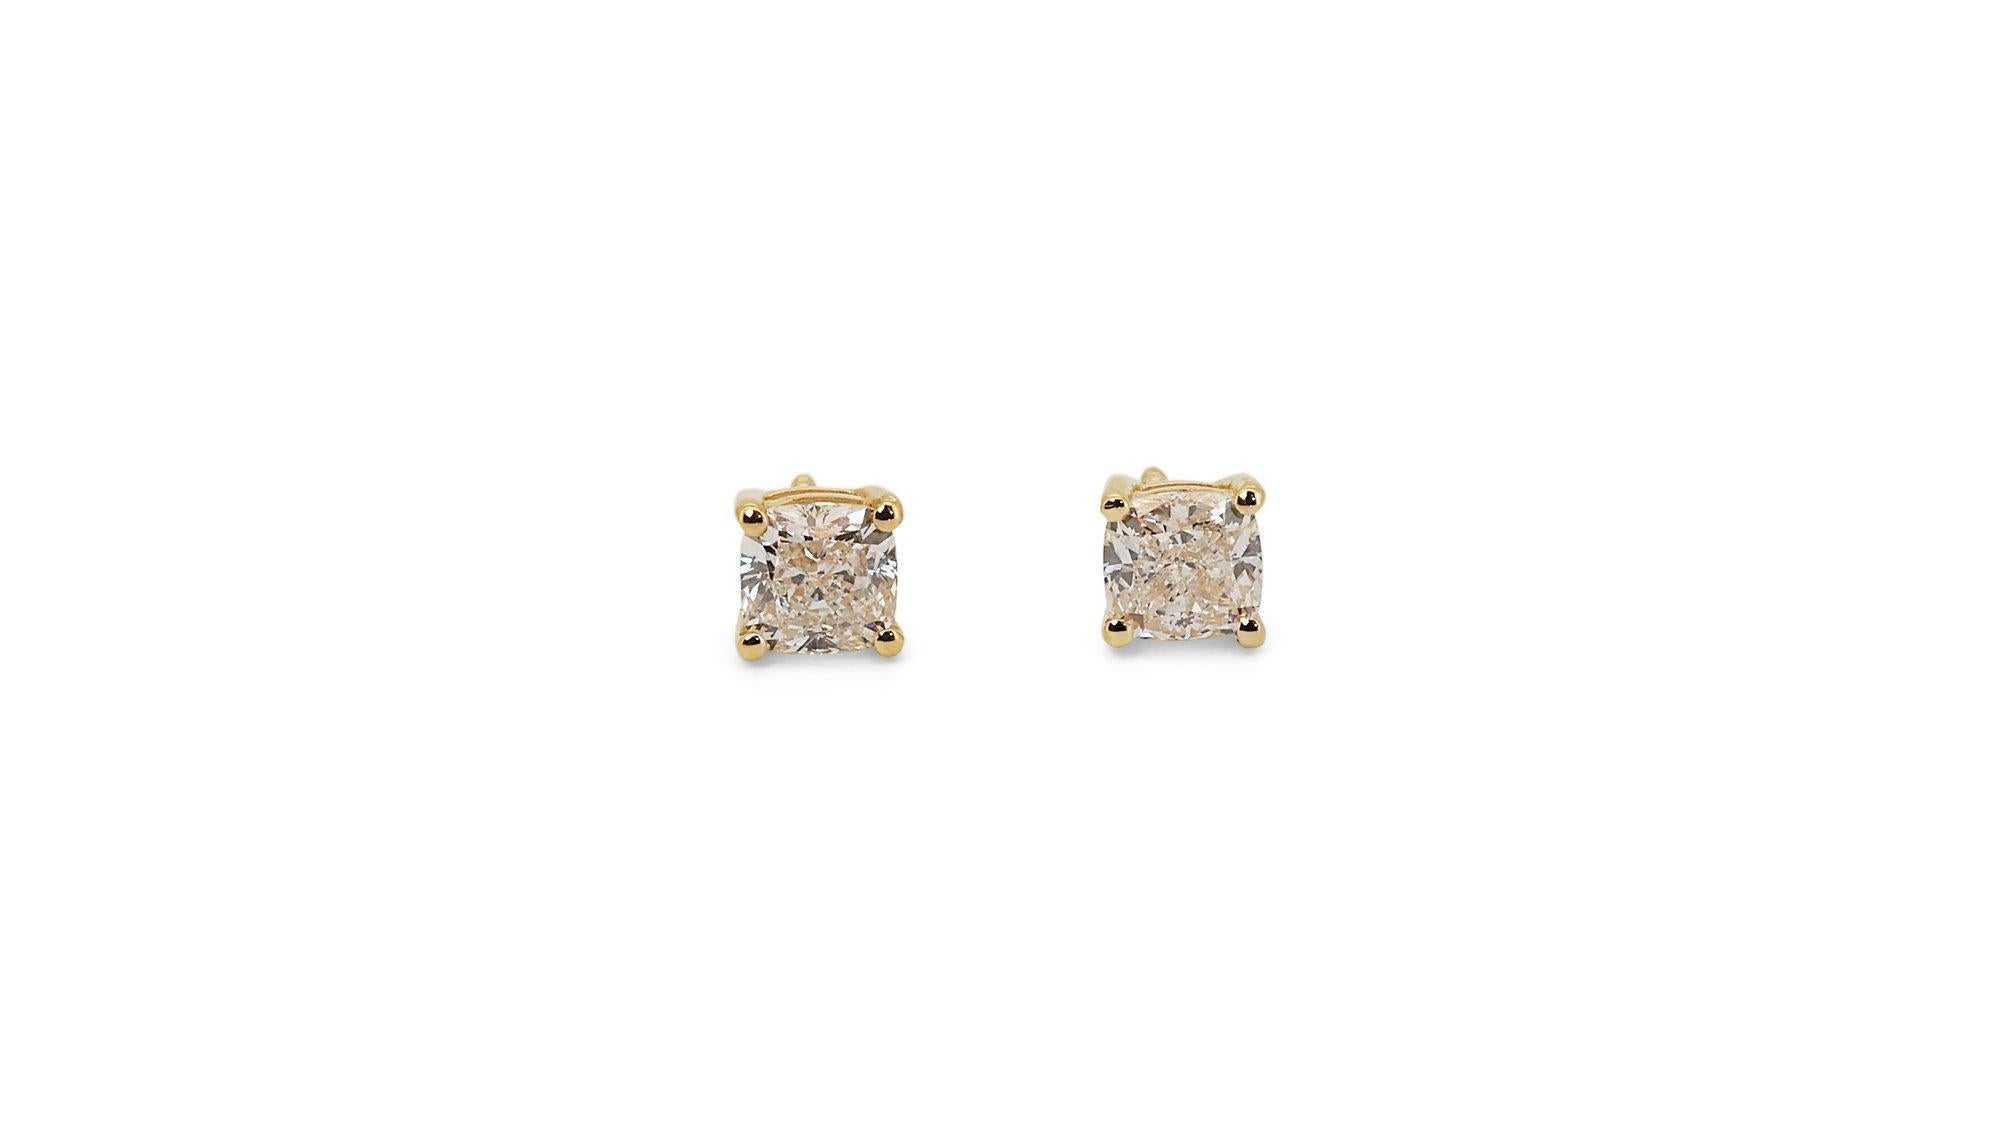 A gorgeous stud pair of earrings with dazzling 1.5-carat cushion shape diamonds. The jewelry is made of 18K Yellow Gold with a high-quality polish. It comes with an AIG certificate and a fancy jewelry box.

2 diamonds main stones total of 1.5